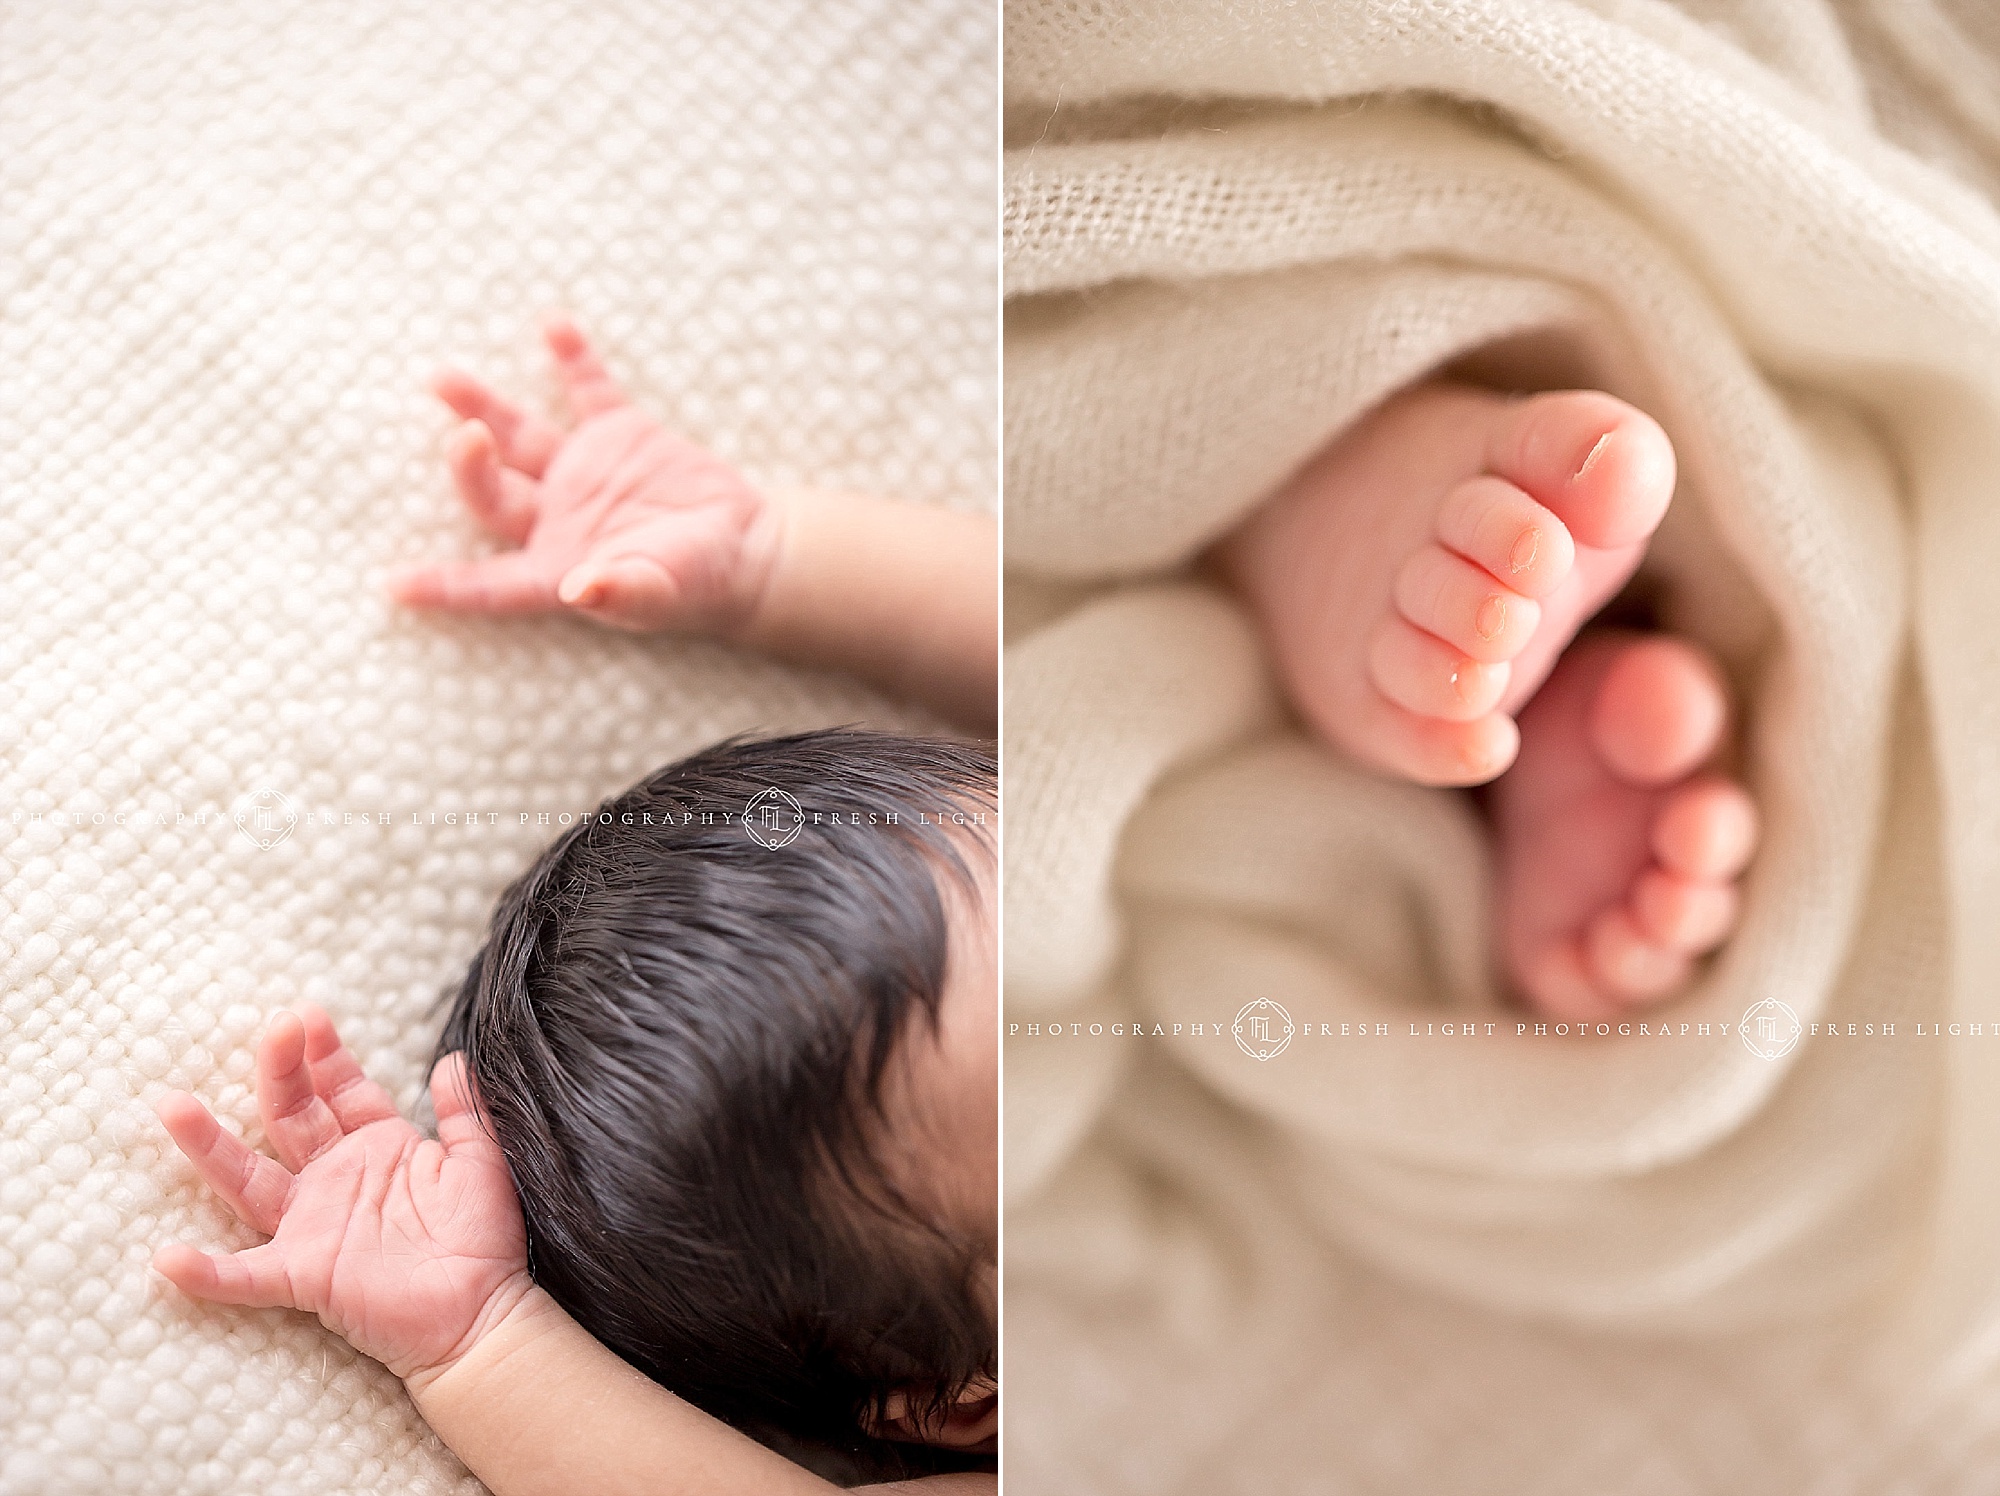 little fingers and toes details shots during newborn photography shoot houston